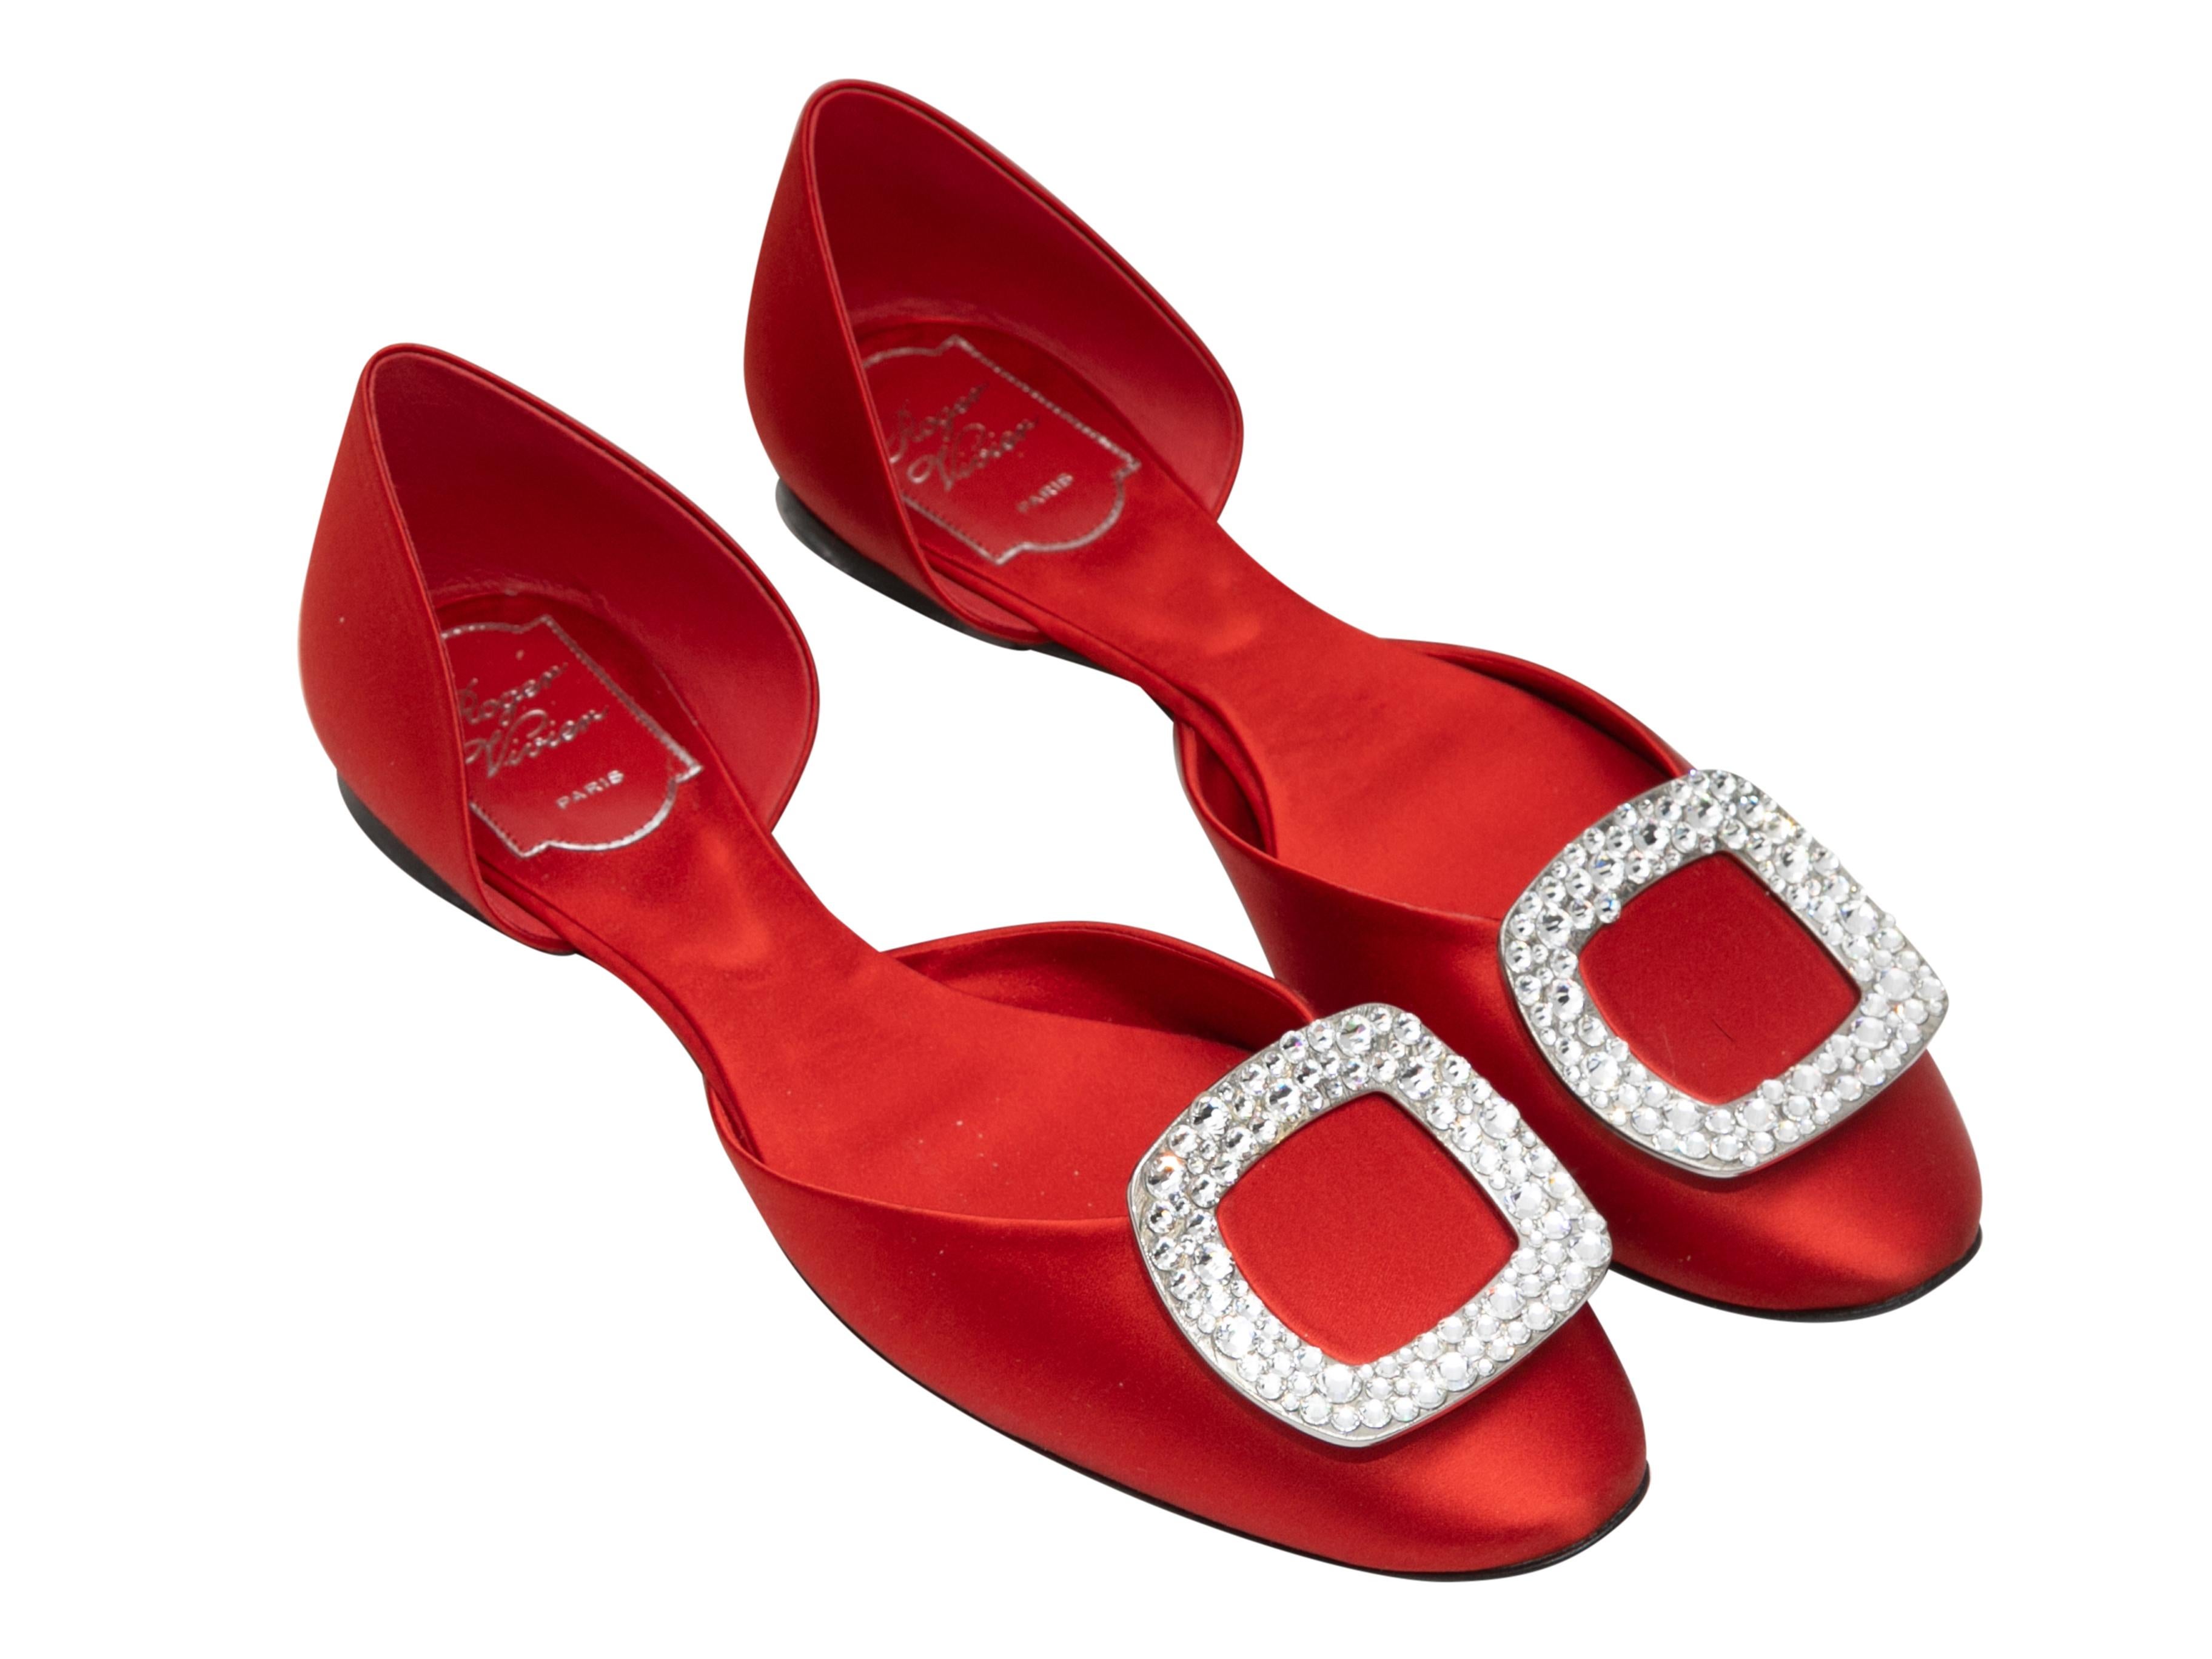 Red satin d'Orsay ballet flats by Roger Vivier. Crystal-embellished silver-tone buckle accents at tops. 

Designer Size: 39
US Recommended Size: 9

